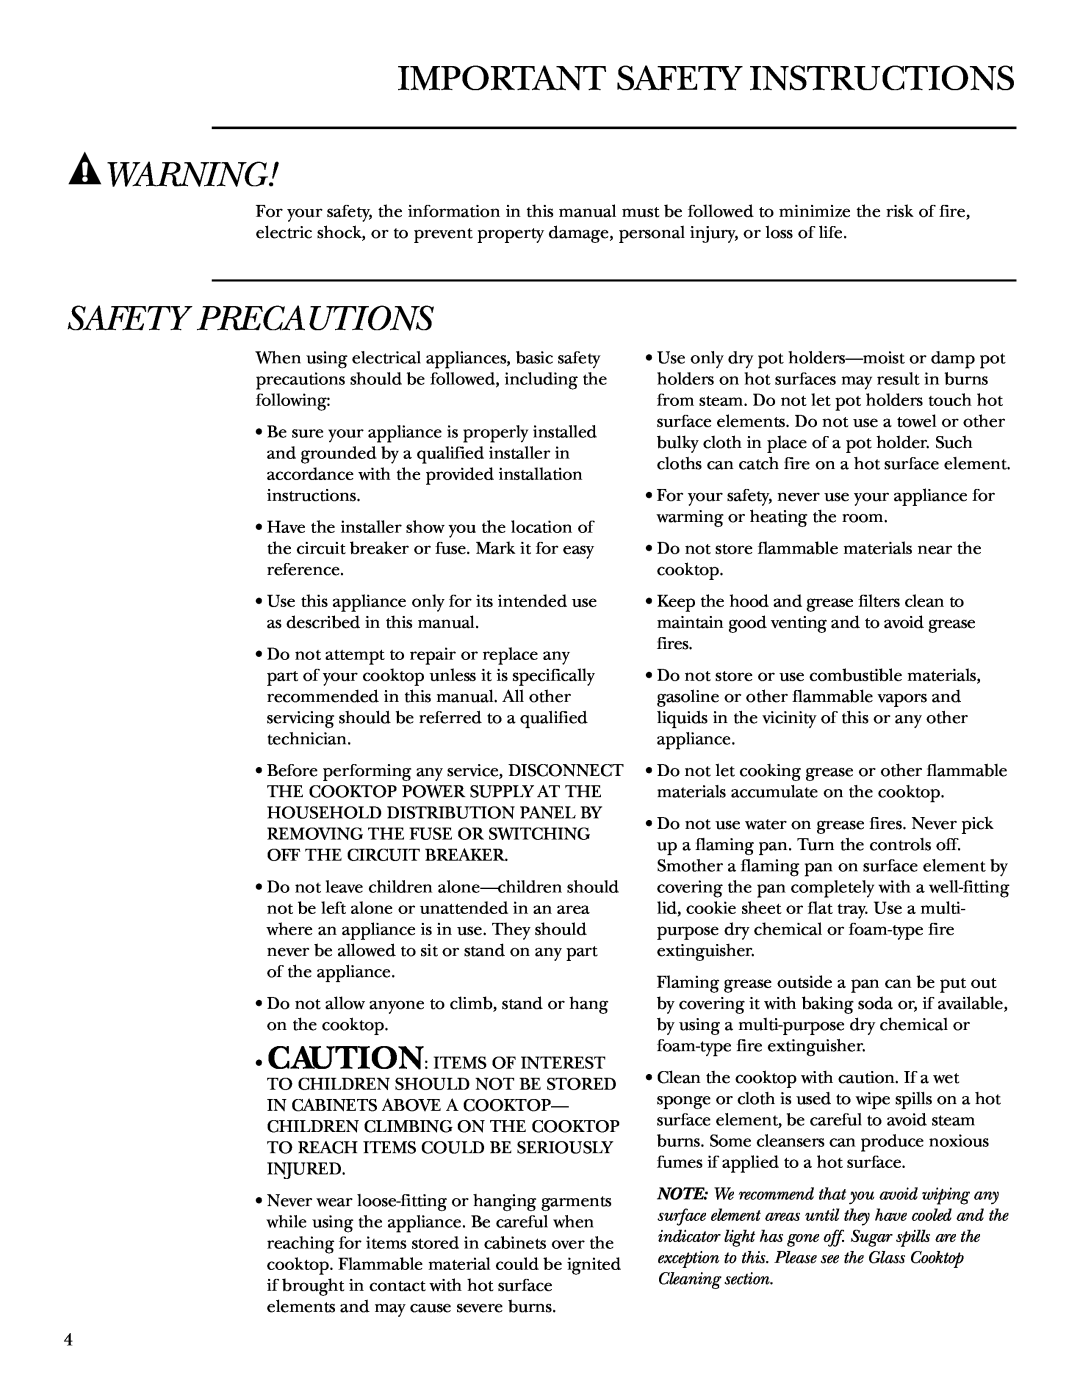 GE ZEU36K owner manual Important Safety Instructions, Safety Precautions 